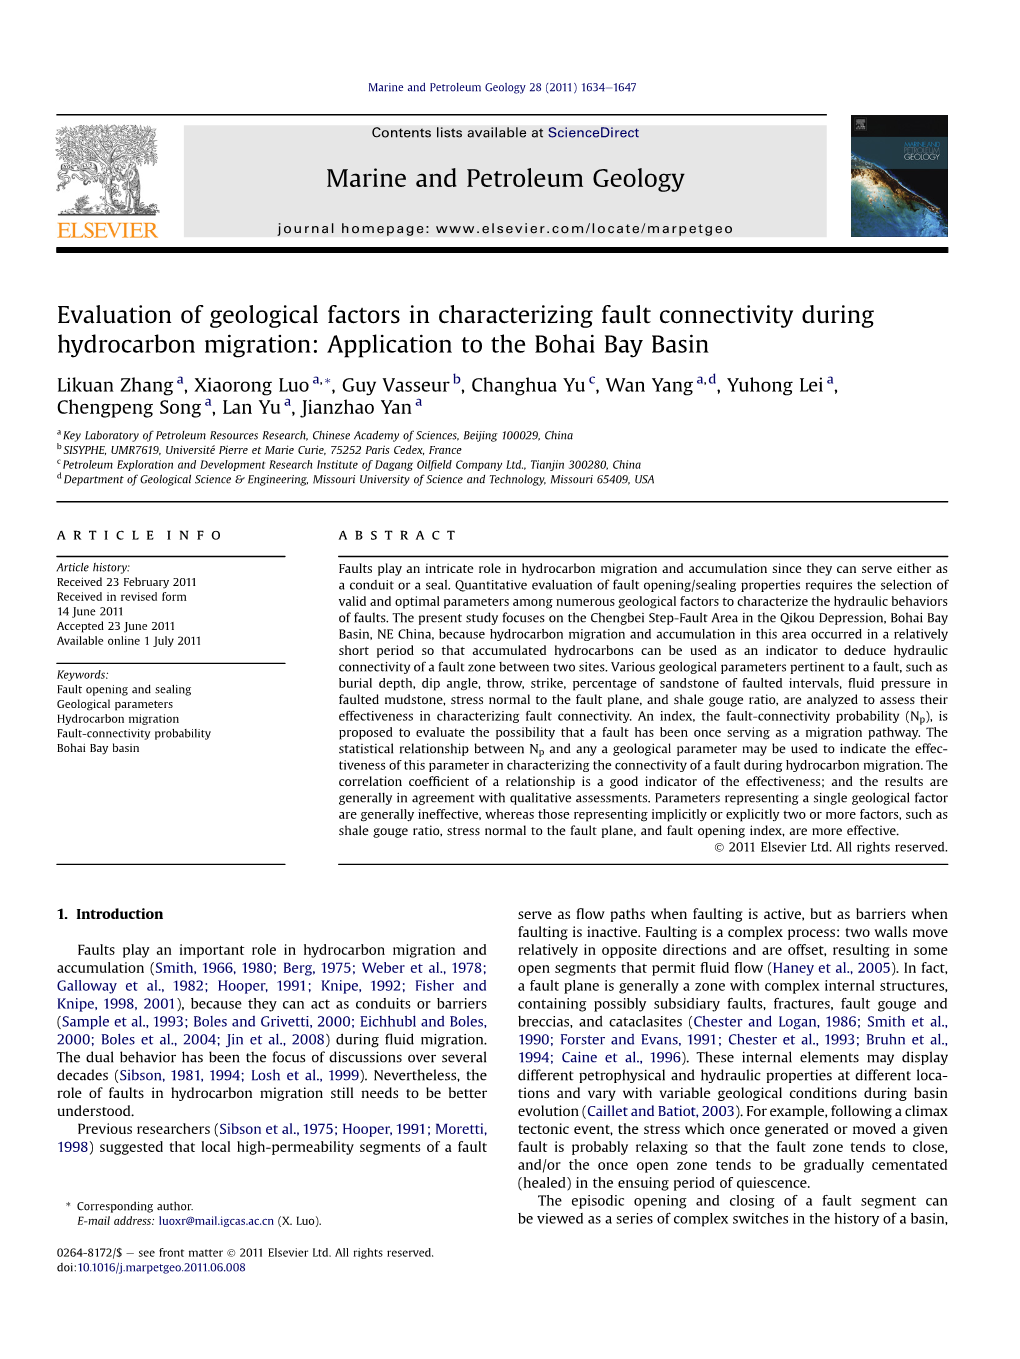 Evaluation of Geological Factors in Characterizing Fault Connectivity During Hydrocarbon Migration: Application to the Bohai Bay Basin